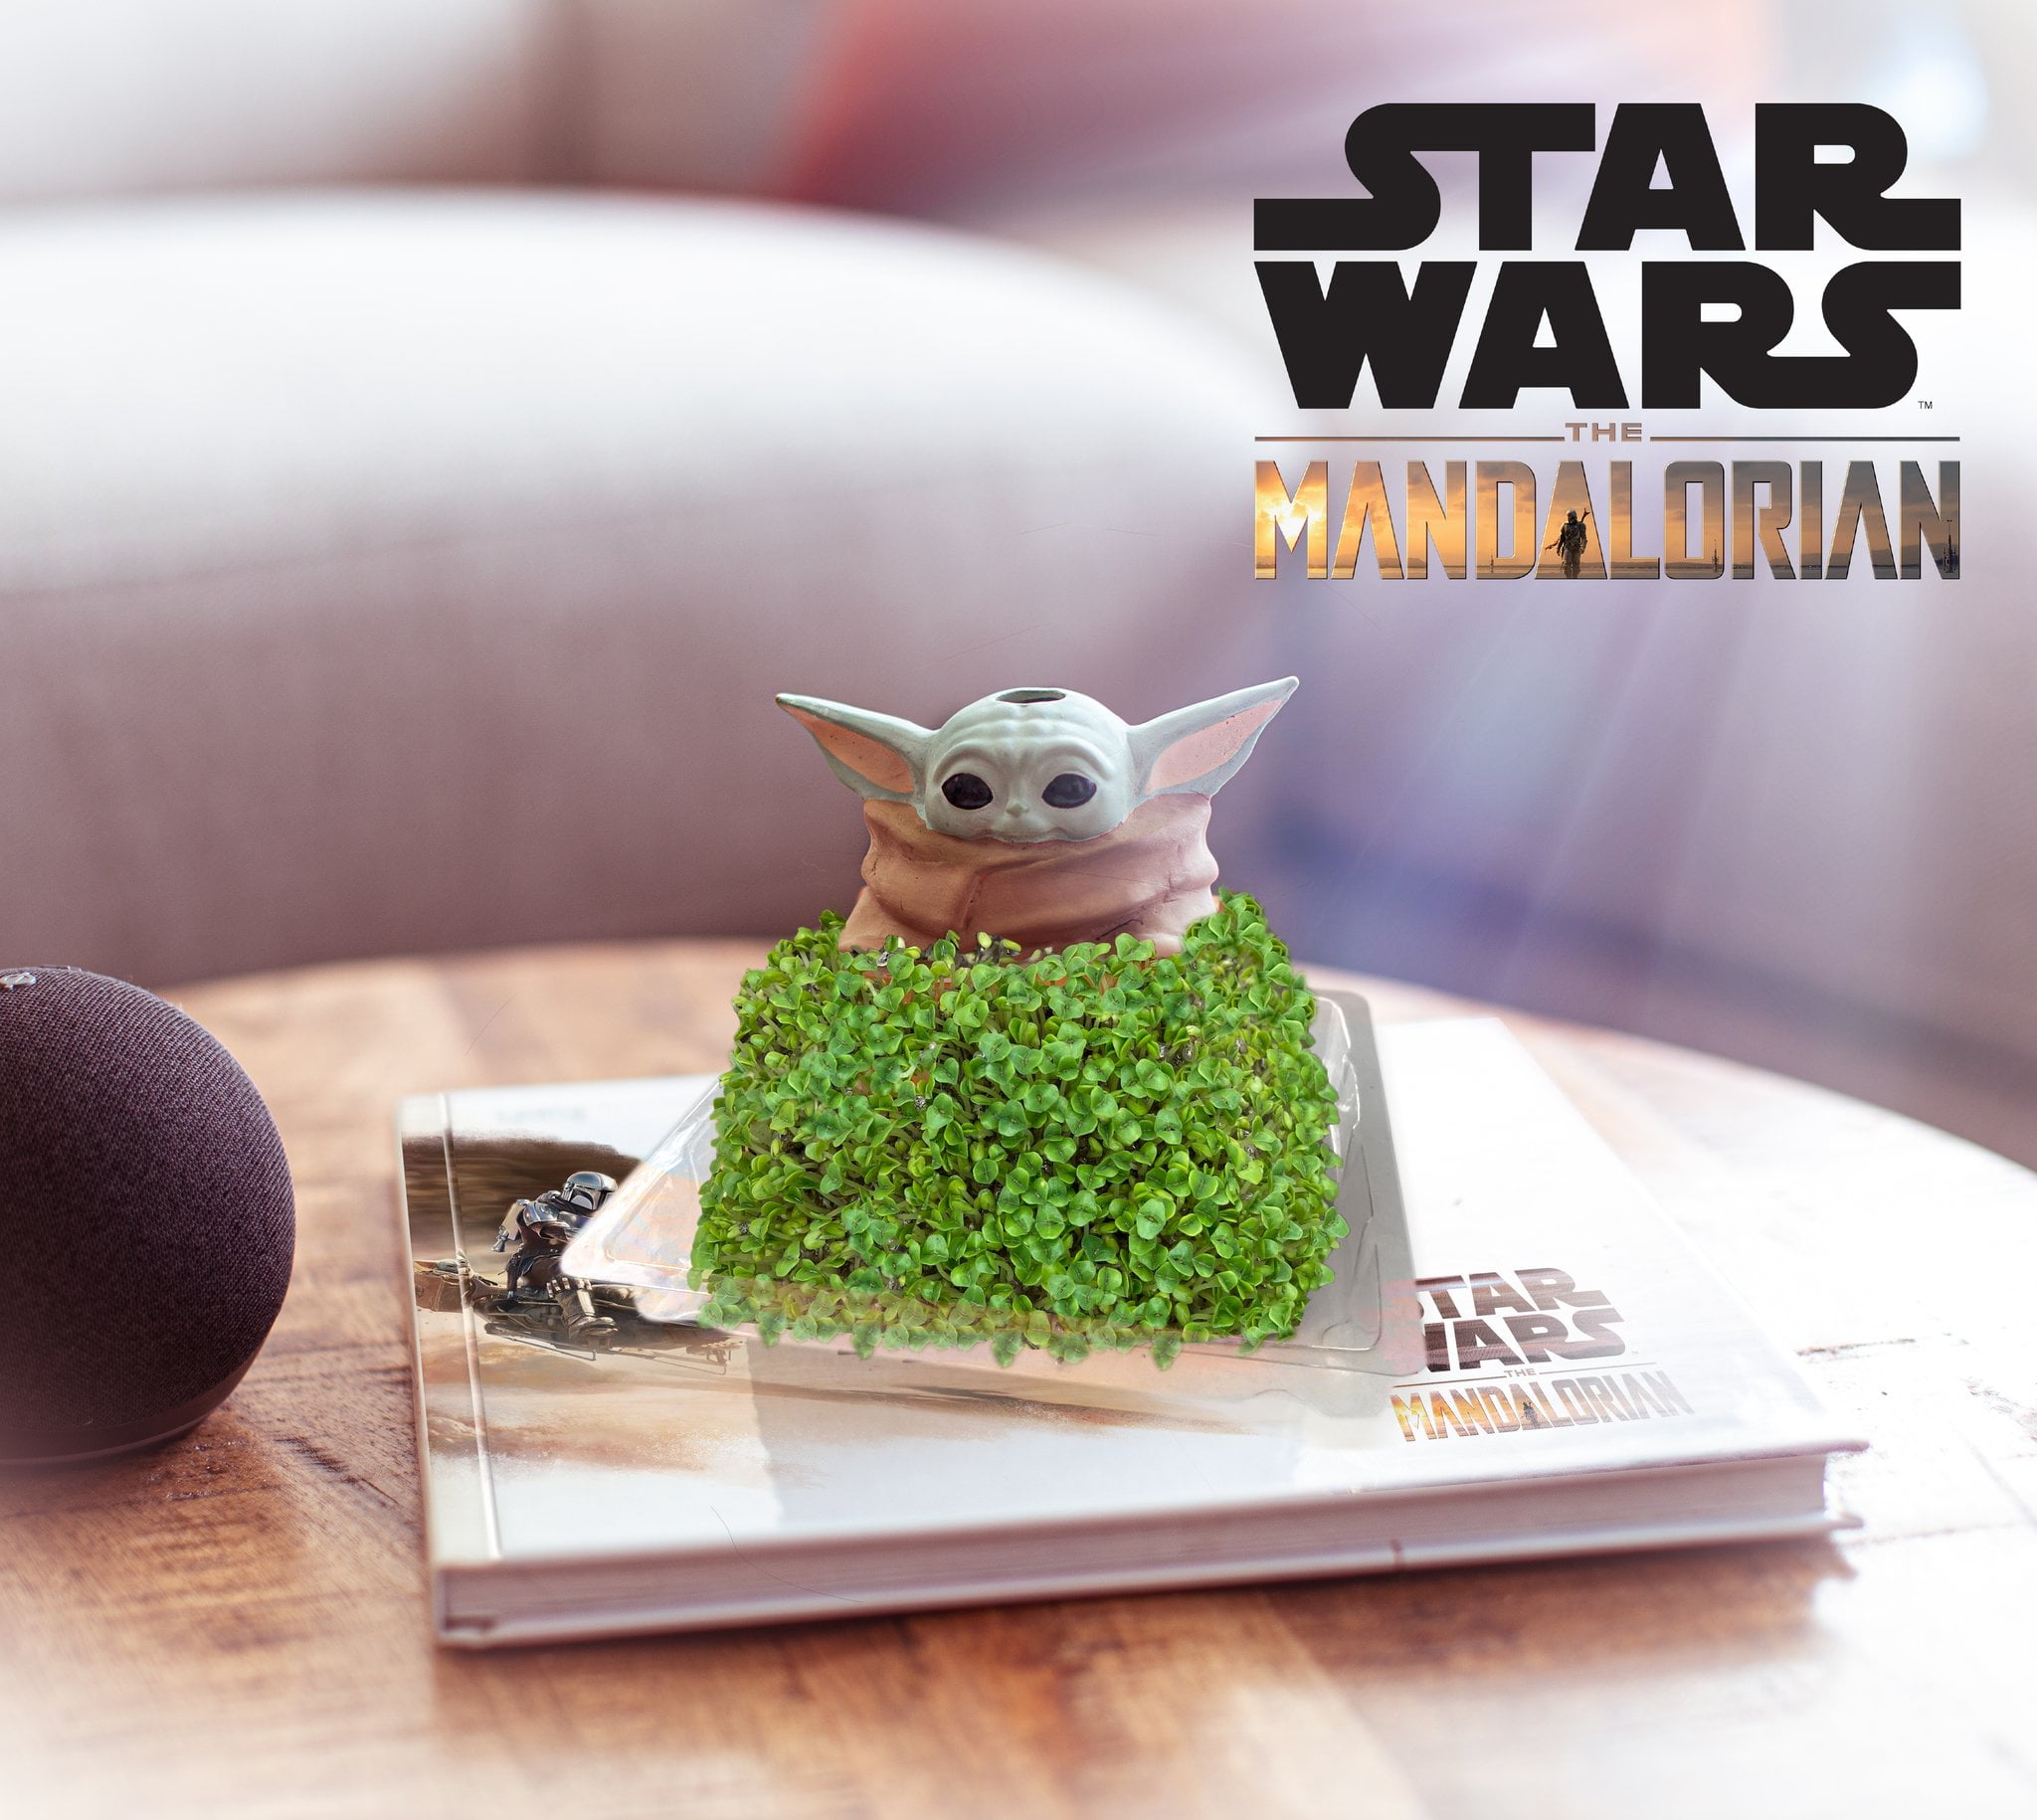 Baby Yoda Chia Pet Available For Preorder! MORE New Star Wars Merchandise  - Inside the Magic